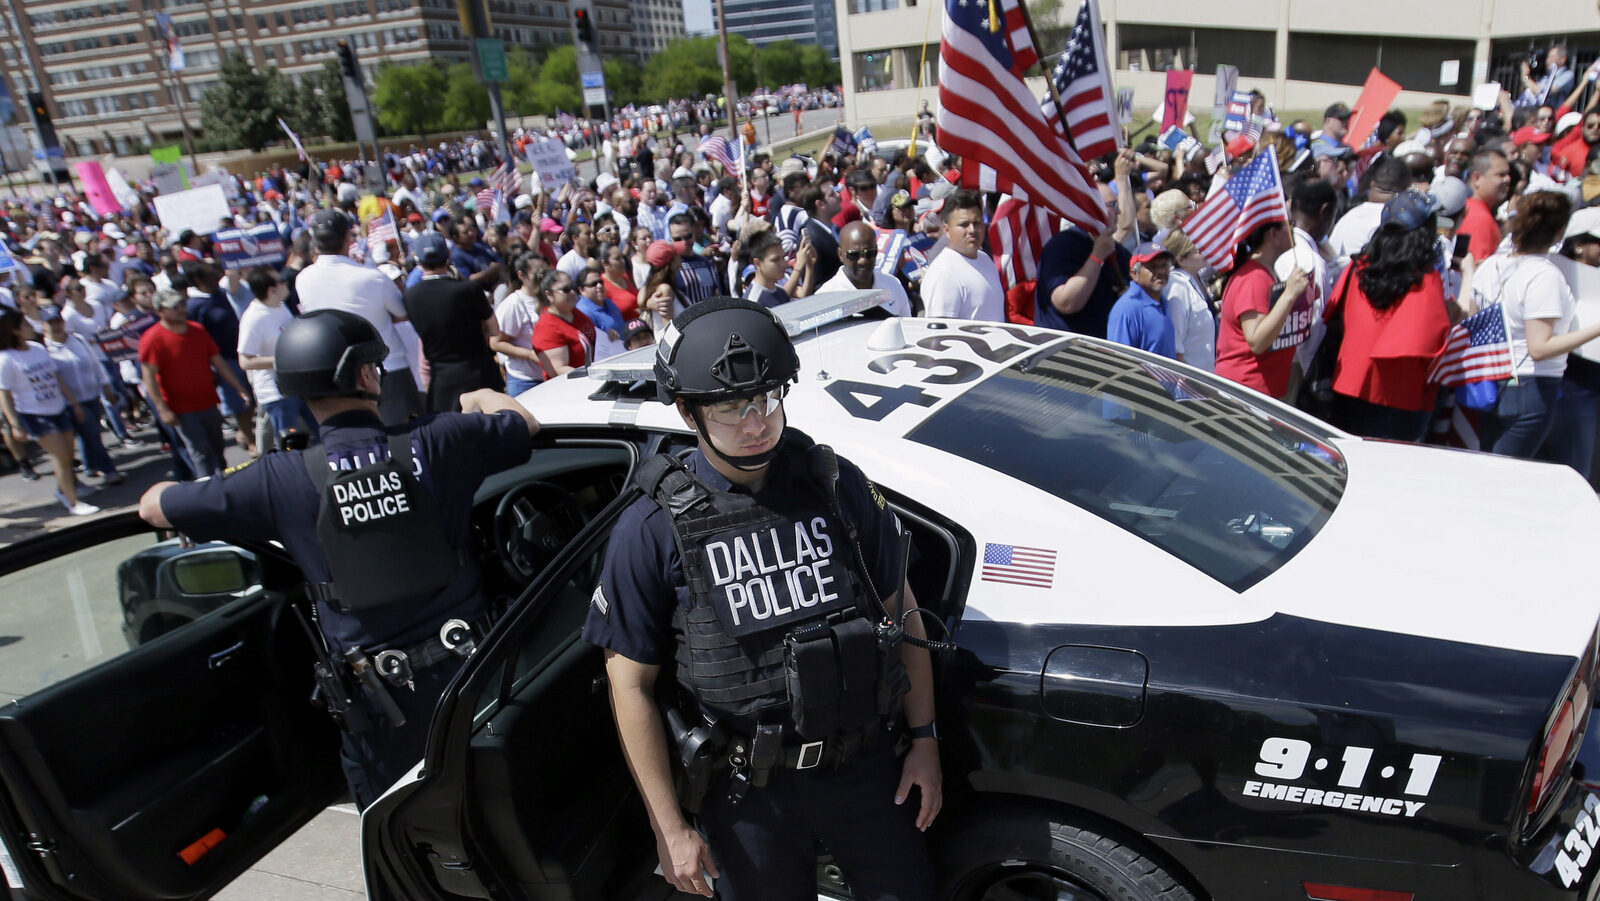 Dallas police stand guard during a protest march through downtown Dallas, Sunday, April 9, 2017. (AP/LM Otero)